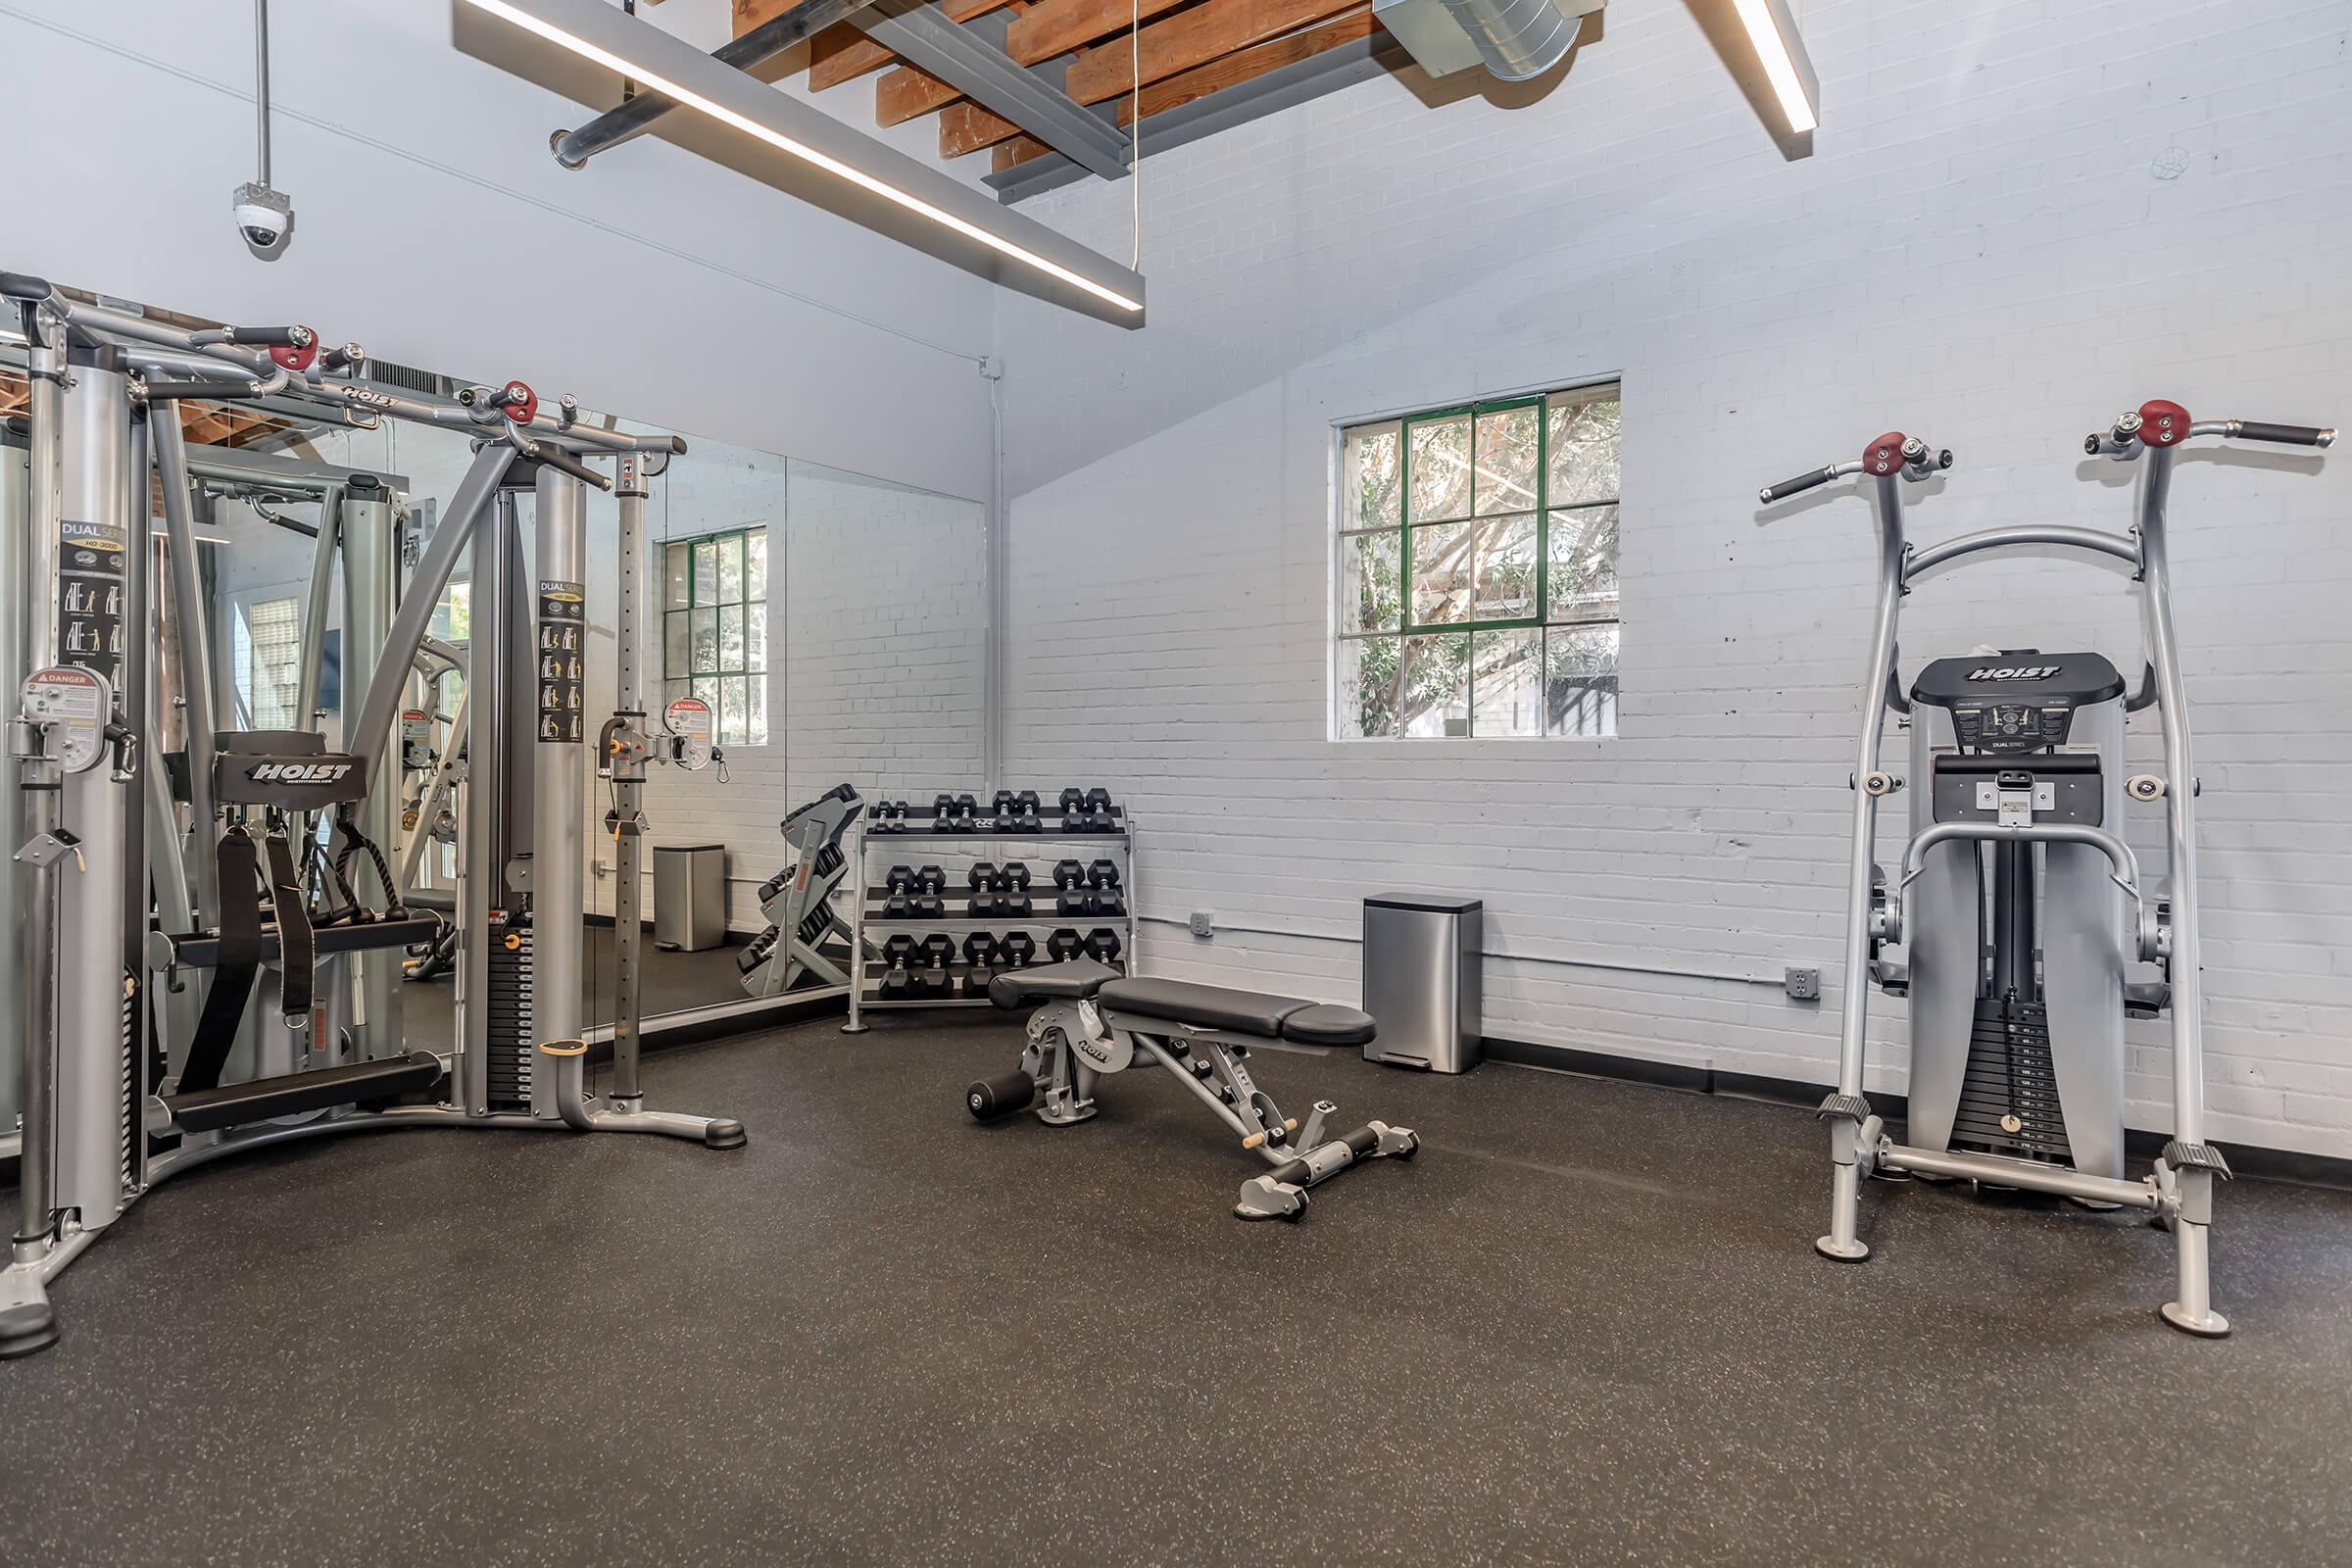 24 HOUR STATE-OF-THE-ART FITNESS CENTER